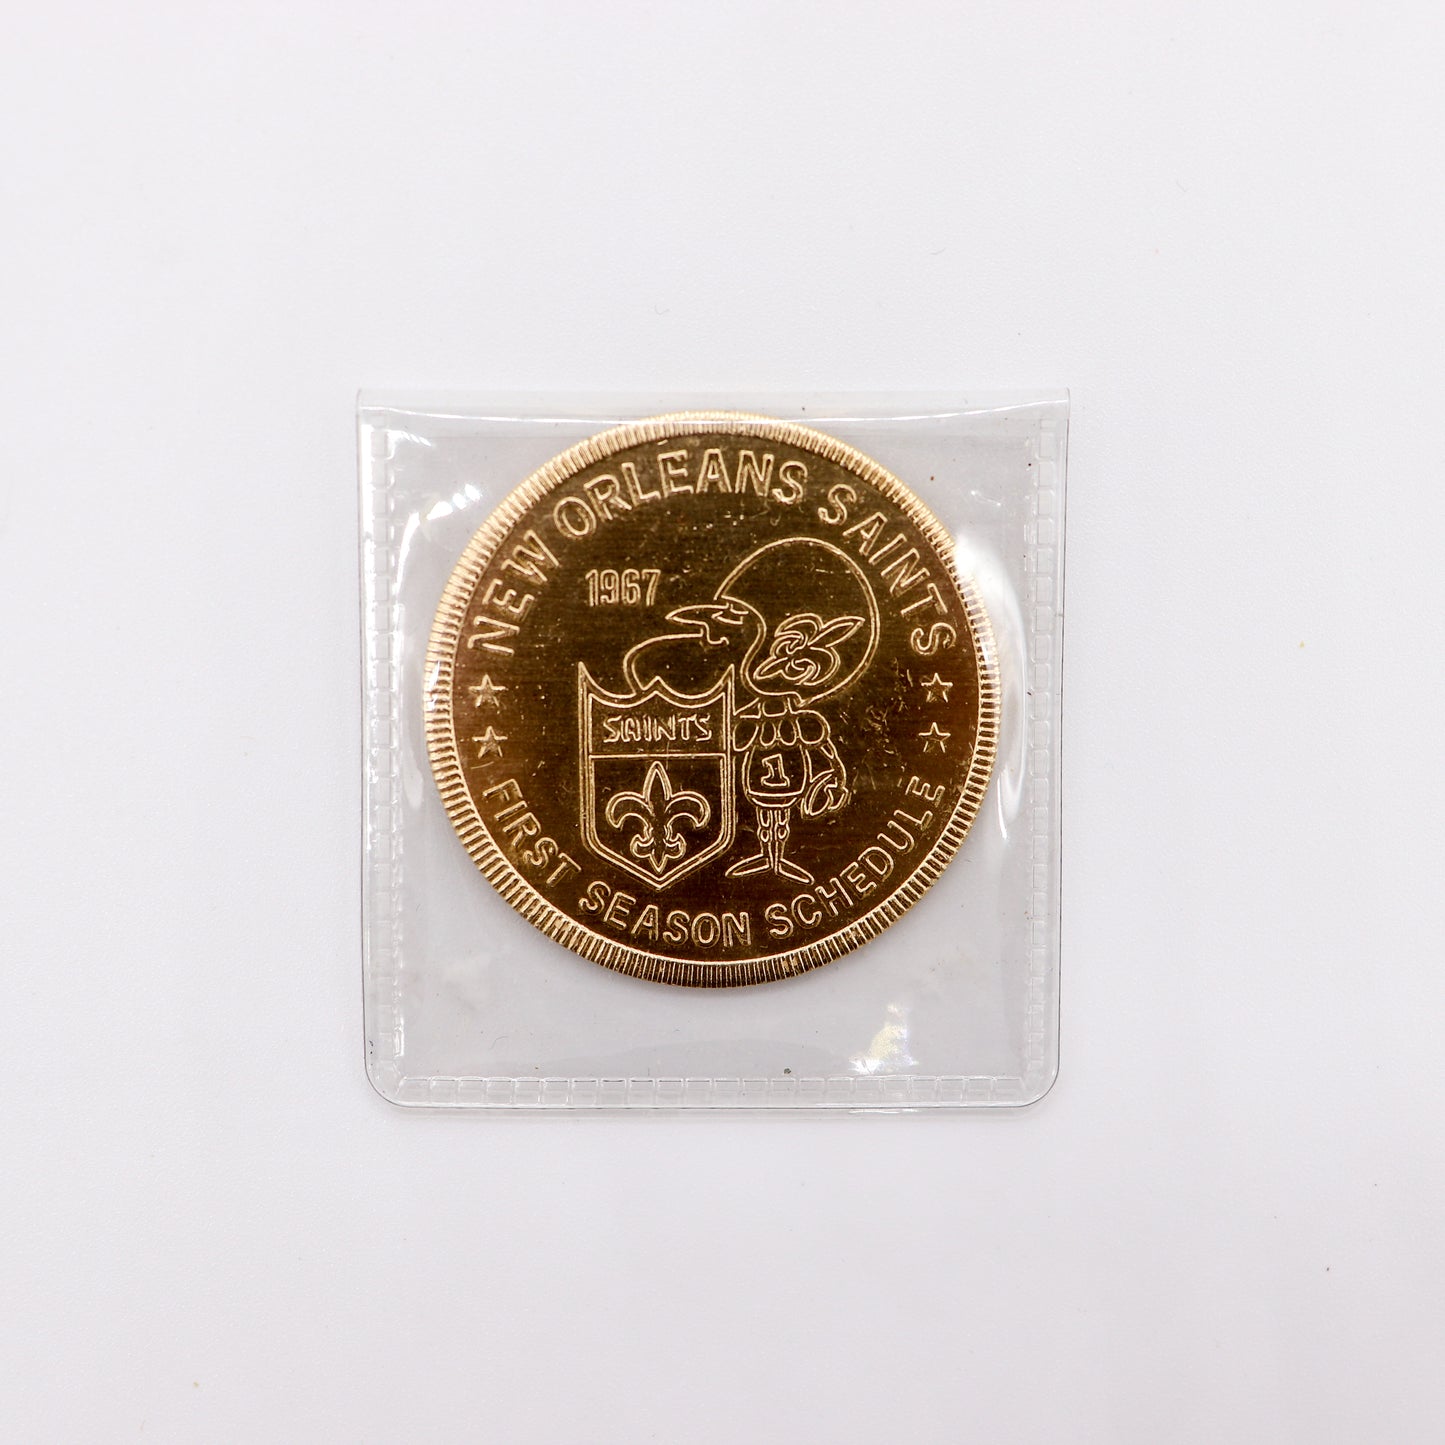 1967 New Orleans Saints Inaugural Season Commemorative Coin by Falstaff Brewing Corporation, Excellent/Near Mint